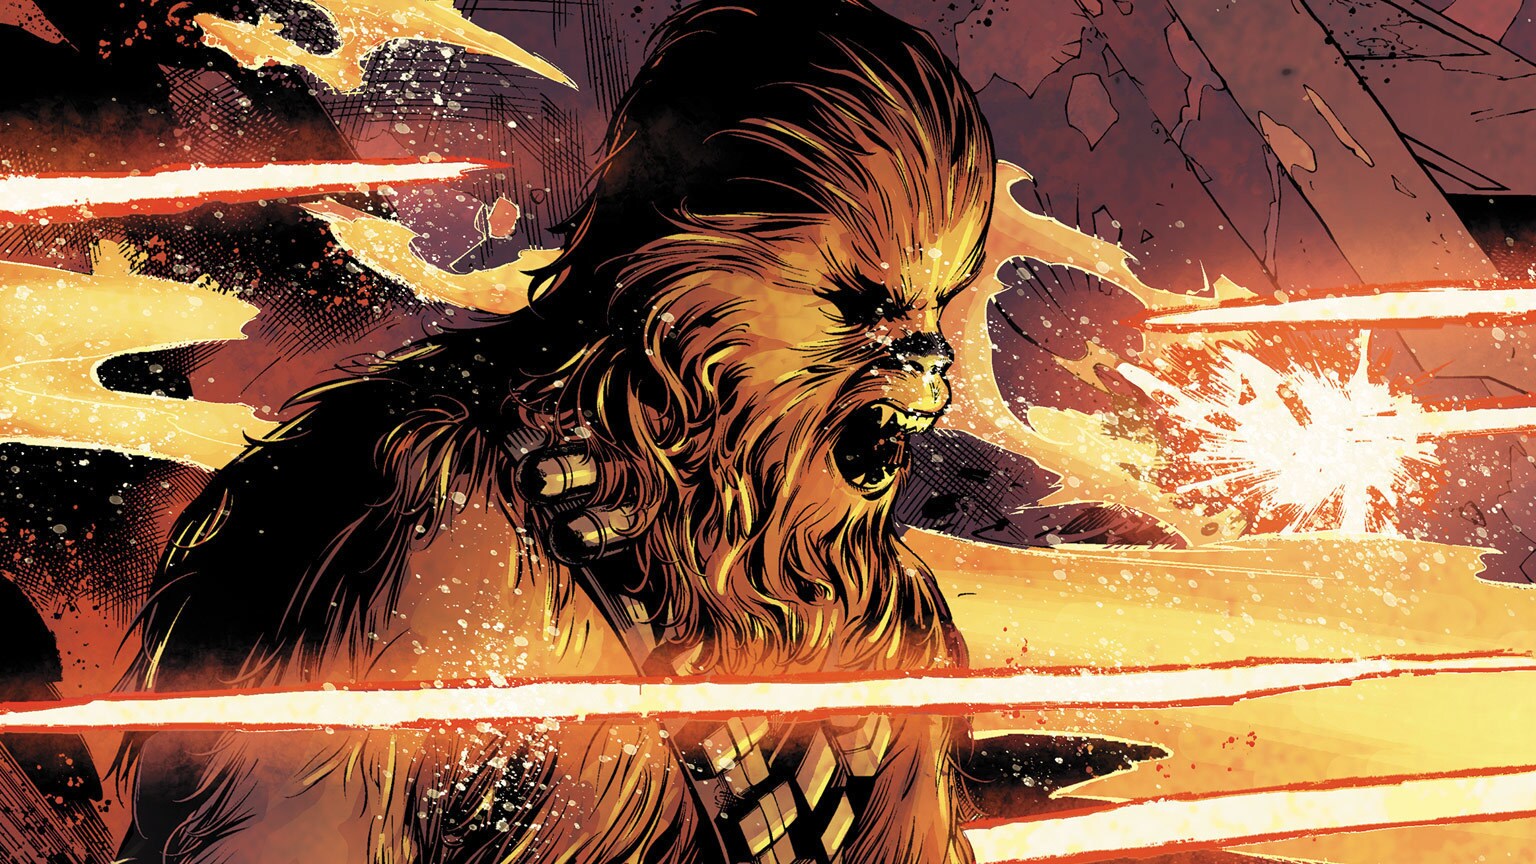 Chewie Prepares to Storm Jabba's Palace in Marvel’s Star Wars #22 – Exclusive Preview